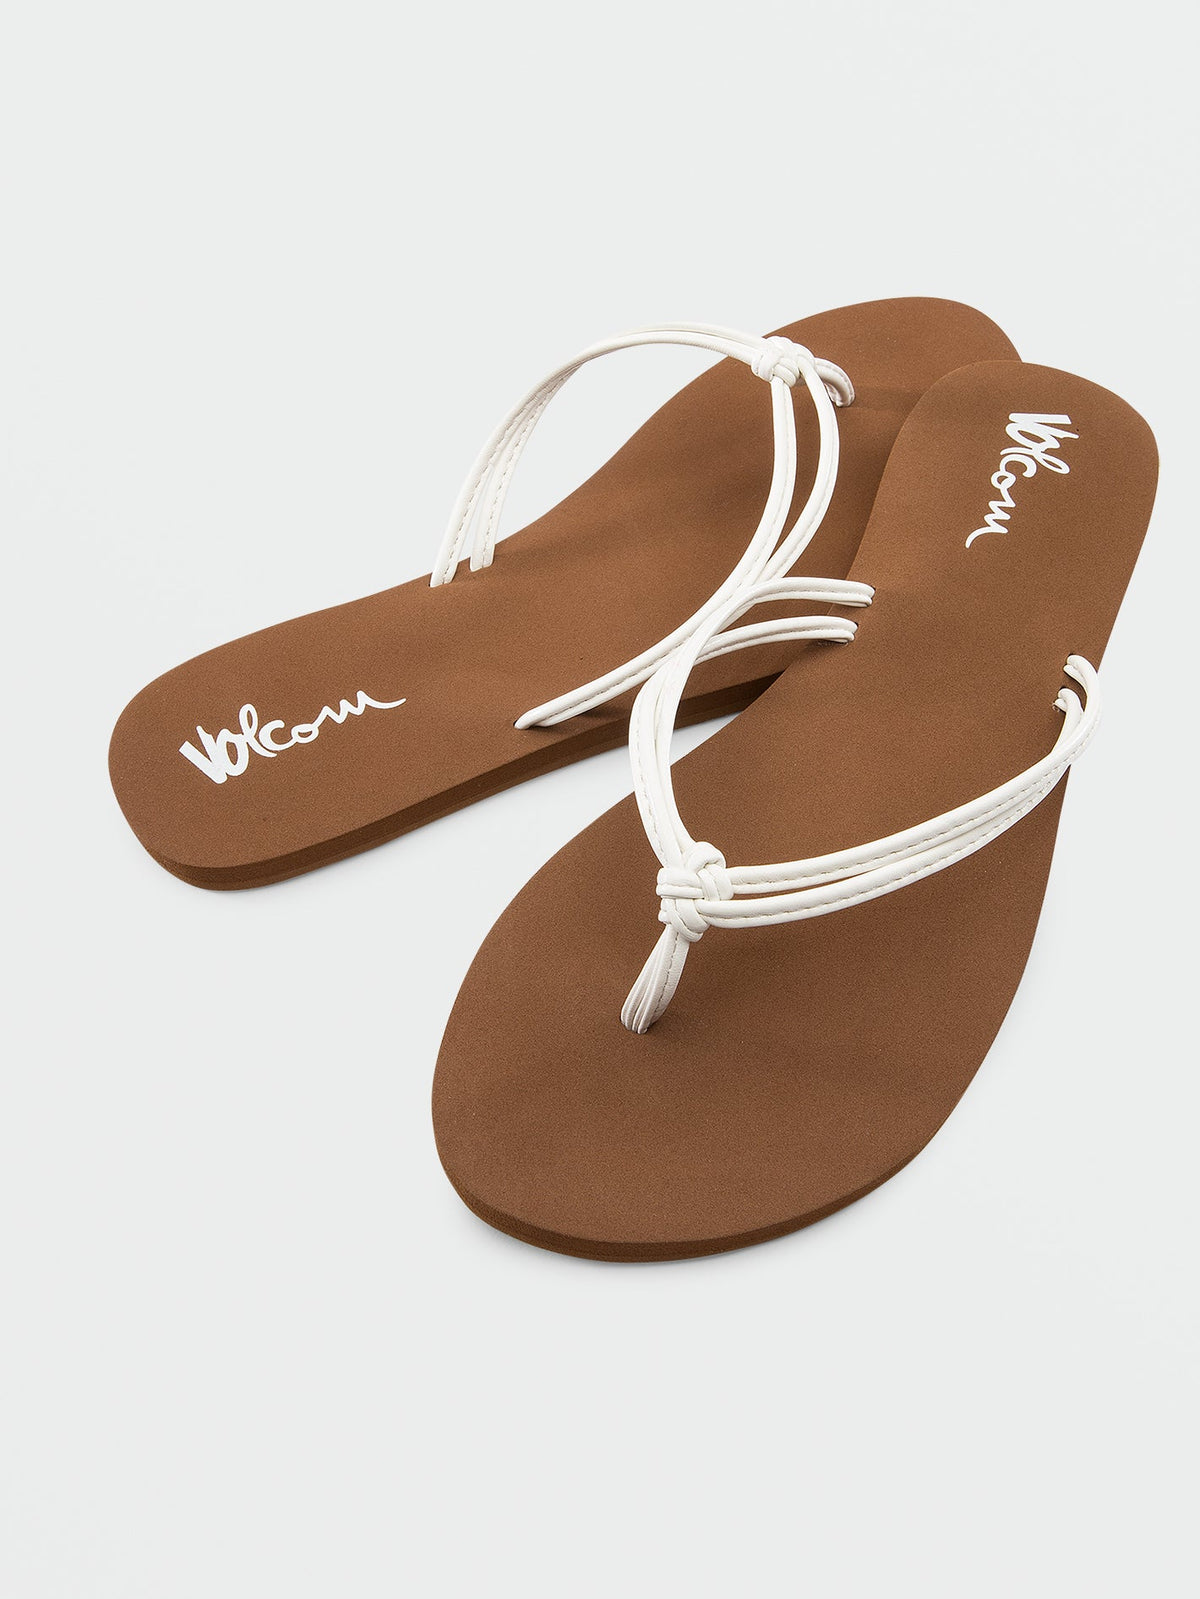 Volcom Forever And Ever II Women's Sandals White